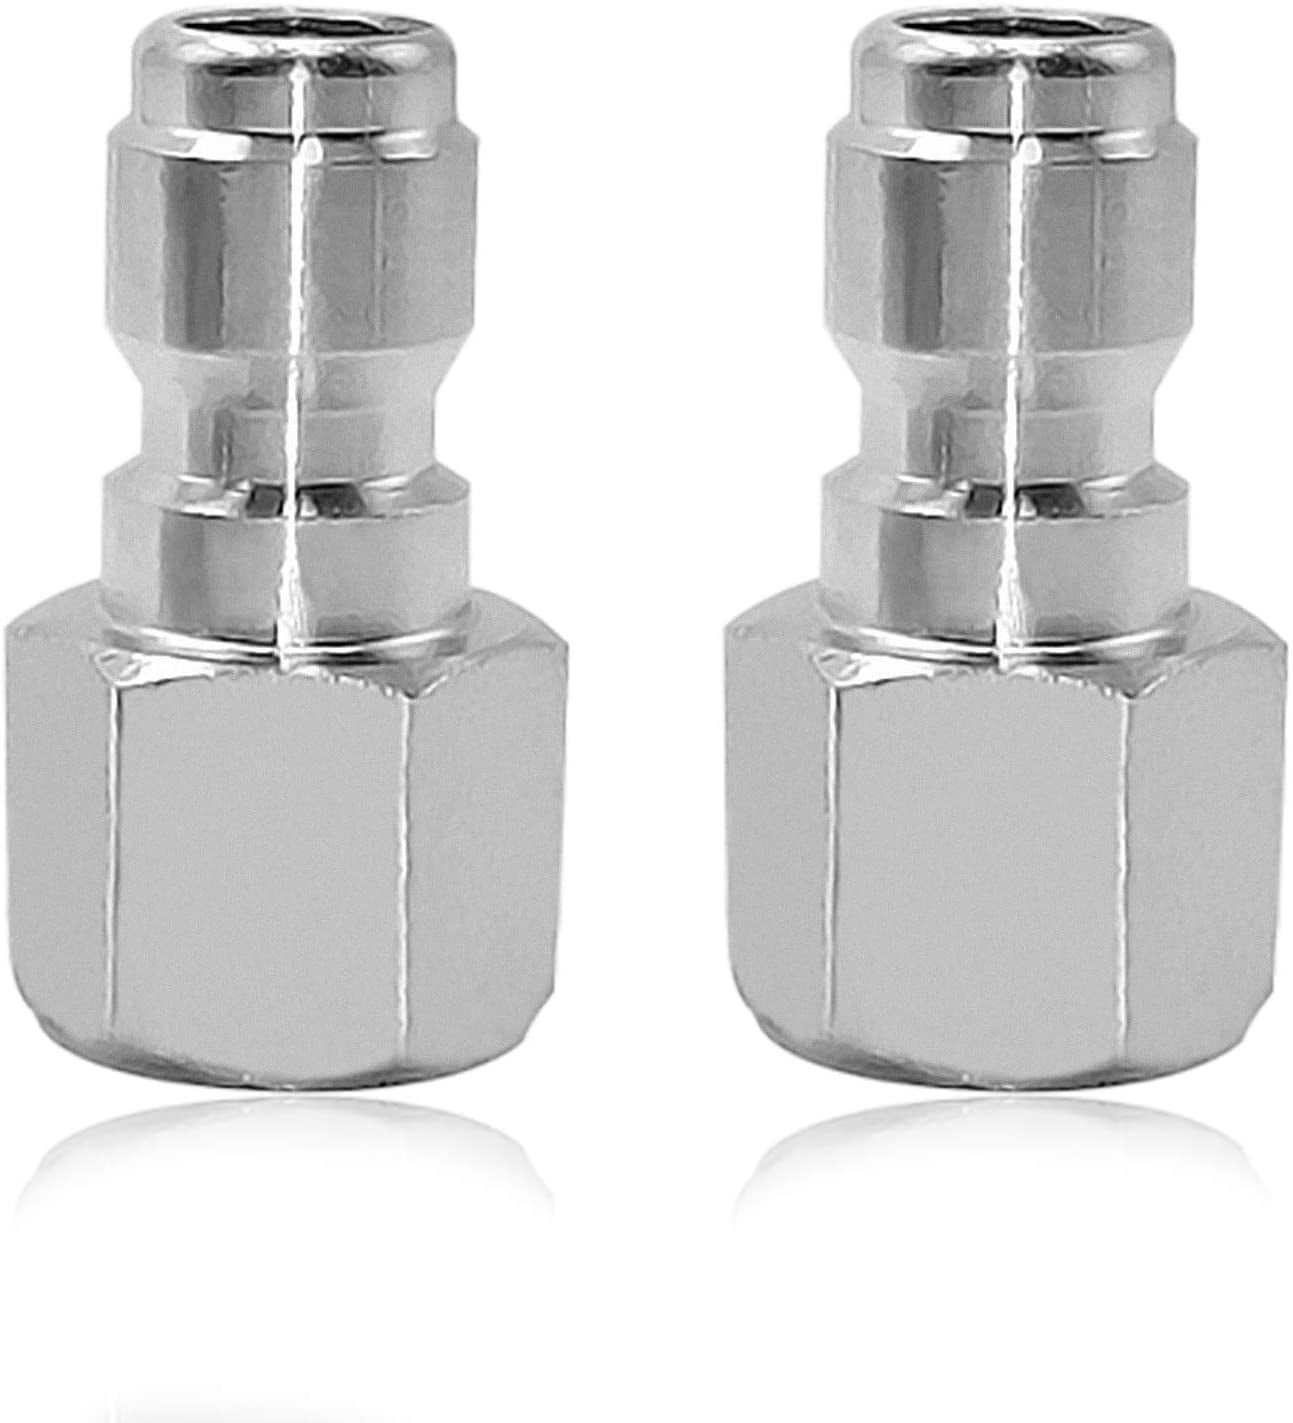 2pcs 3/8 inch Threaded Male Quick Connect Plug Fittings Pressure Washer Adapters 